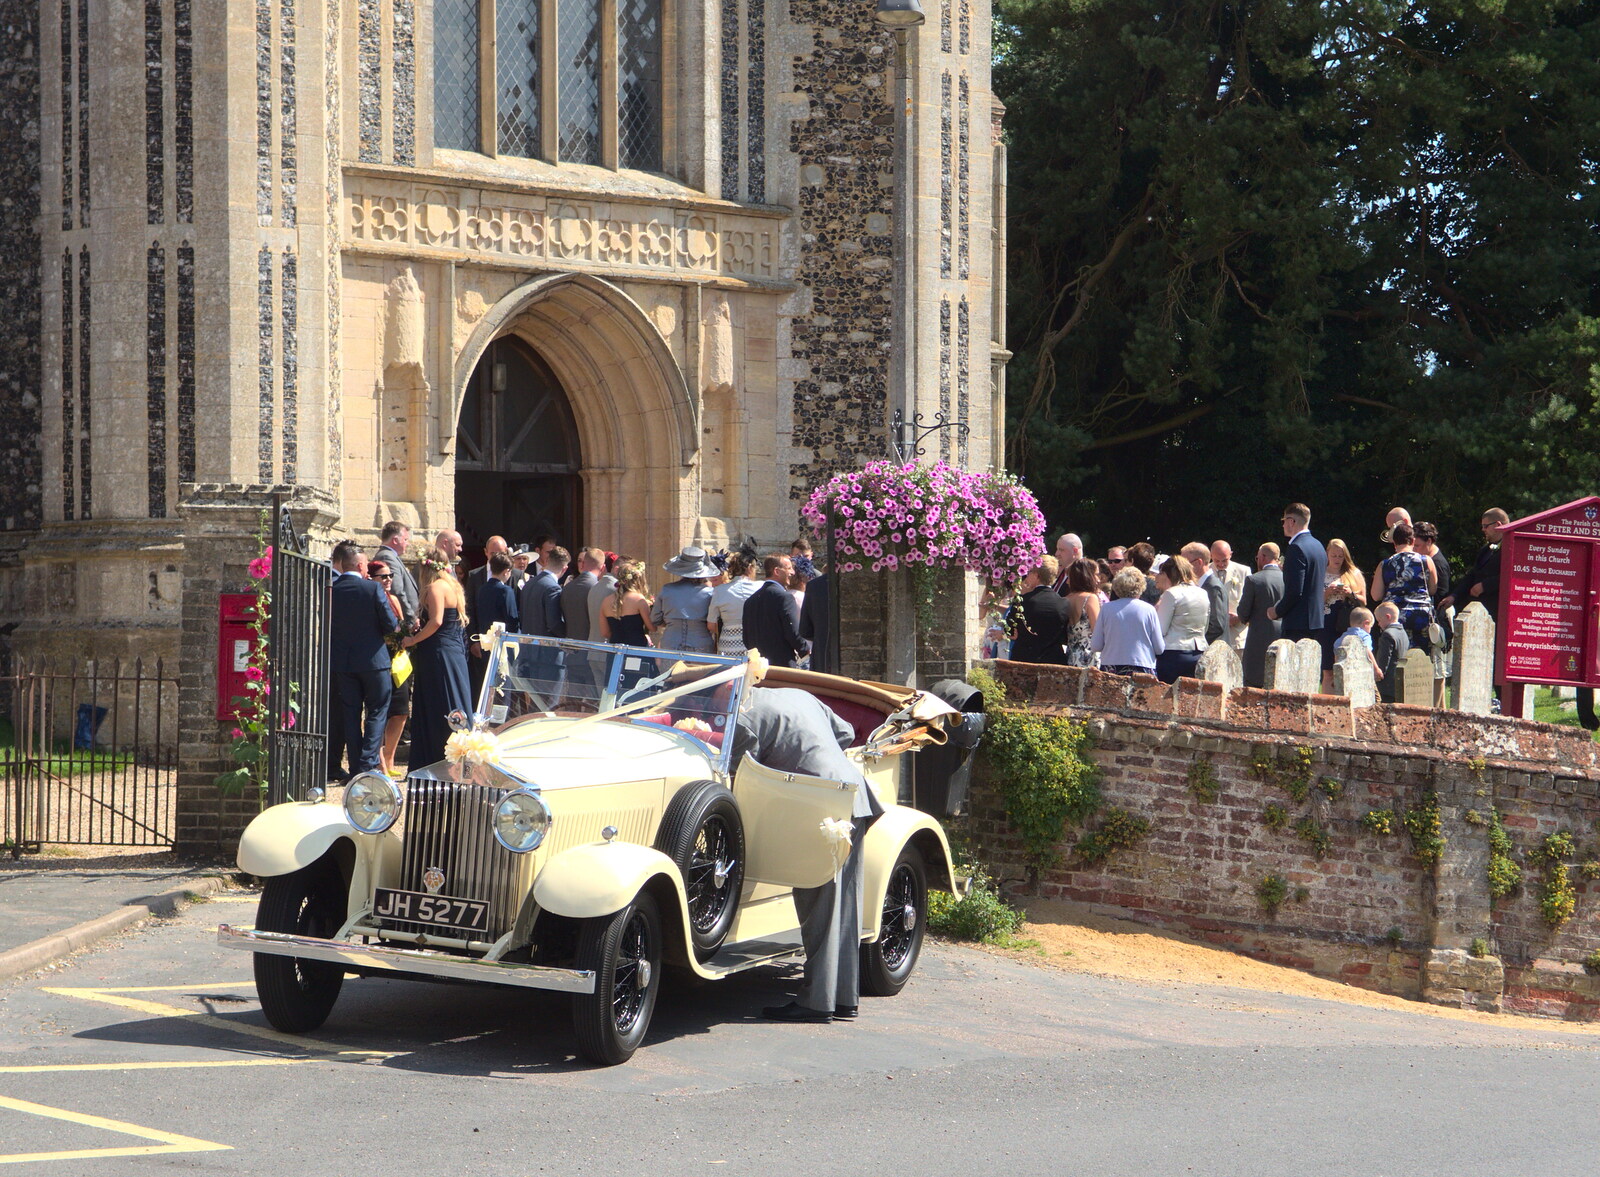 Down at Eye Church, there's a big wedding on from A 1940's Takeover, Eye, Suffolk - 8th August 2015